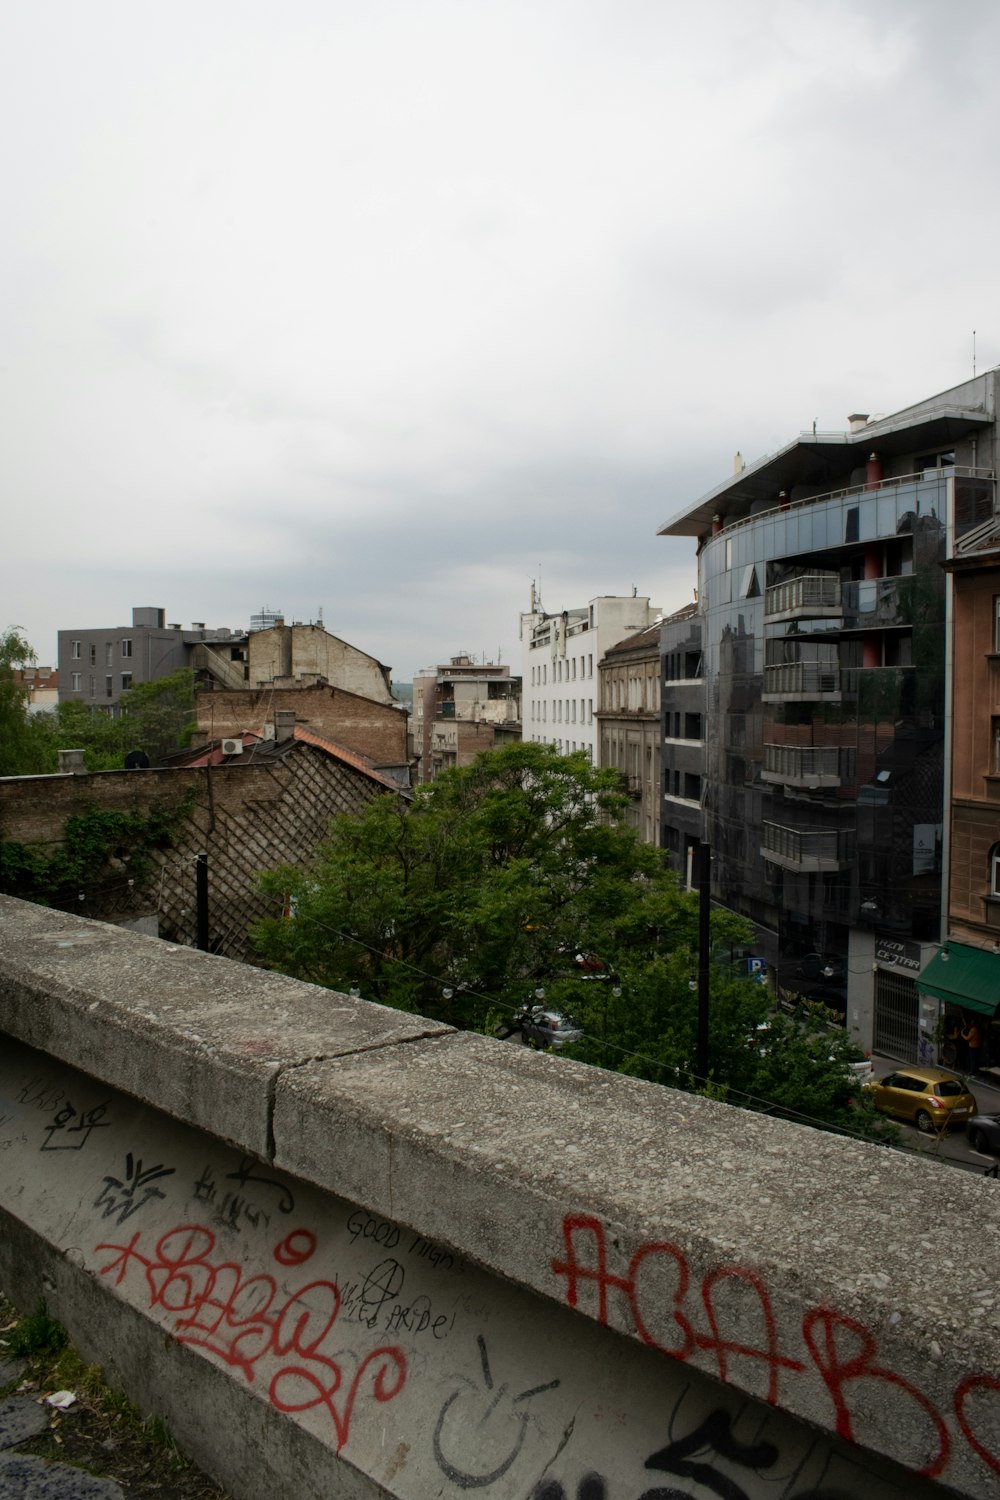 a concrete wall with graffiti on it and buildings in the background